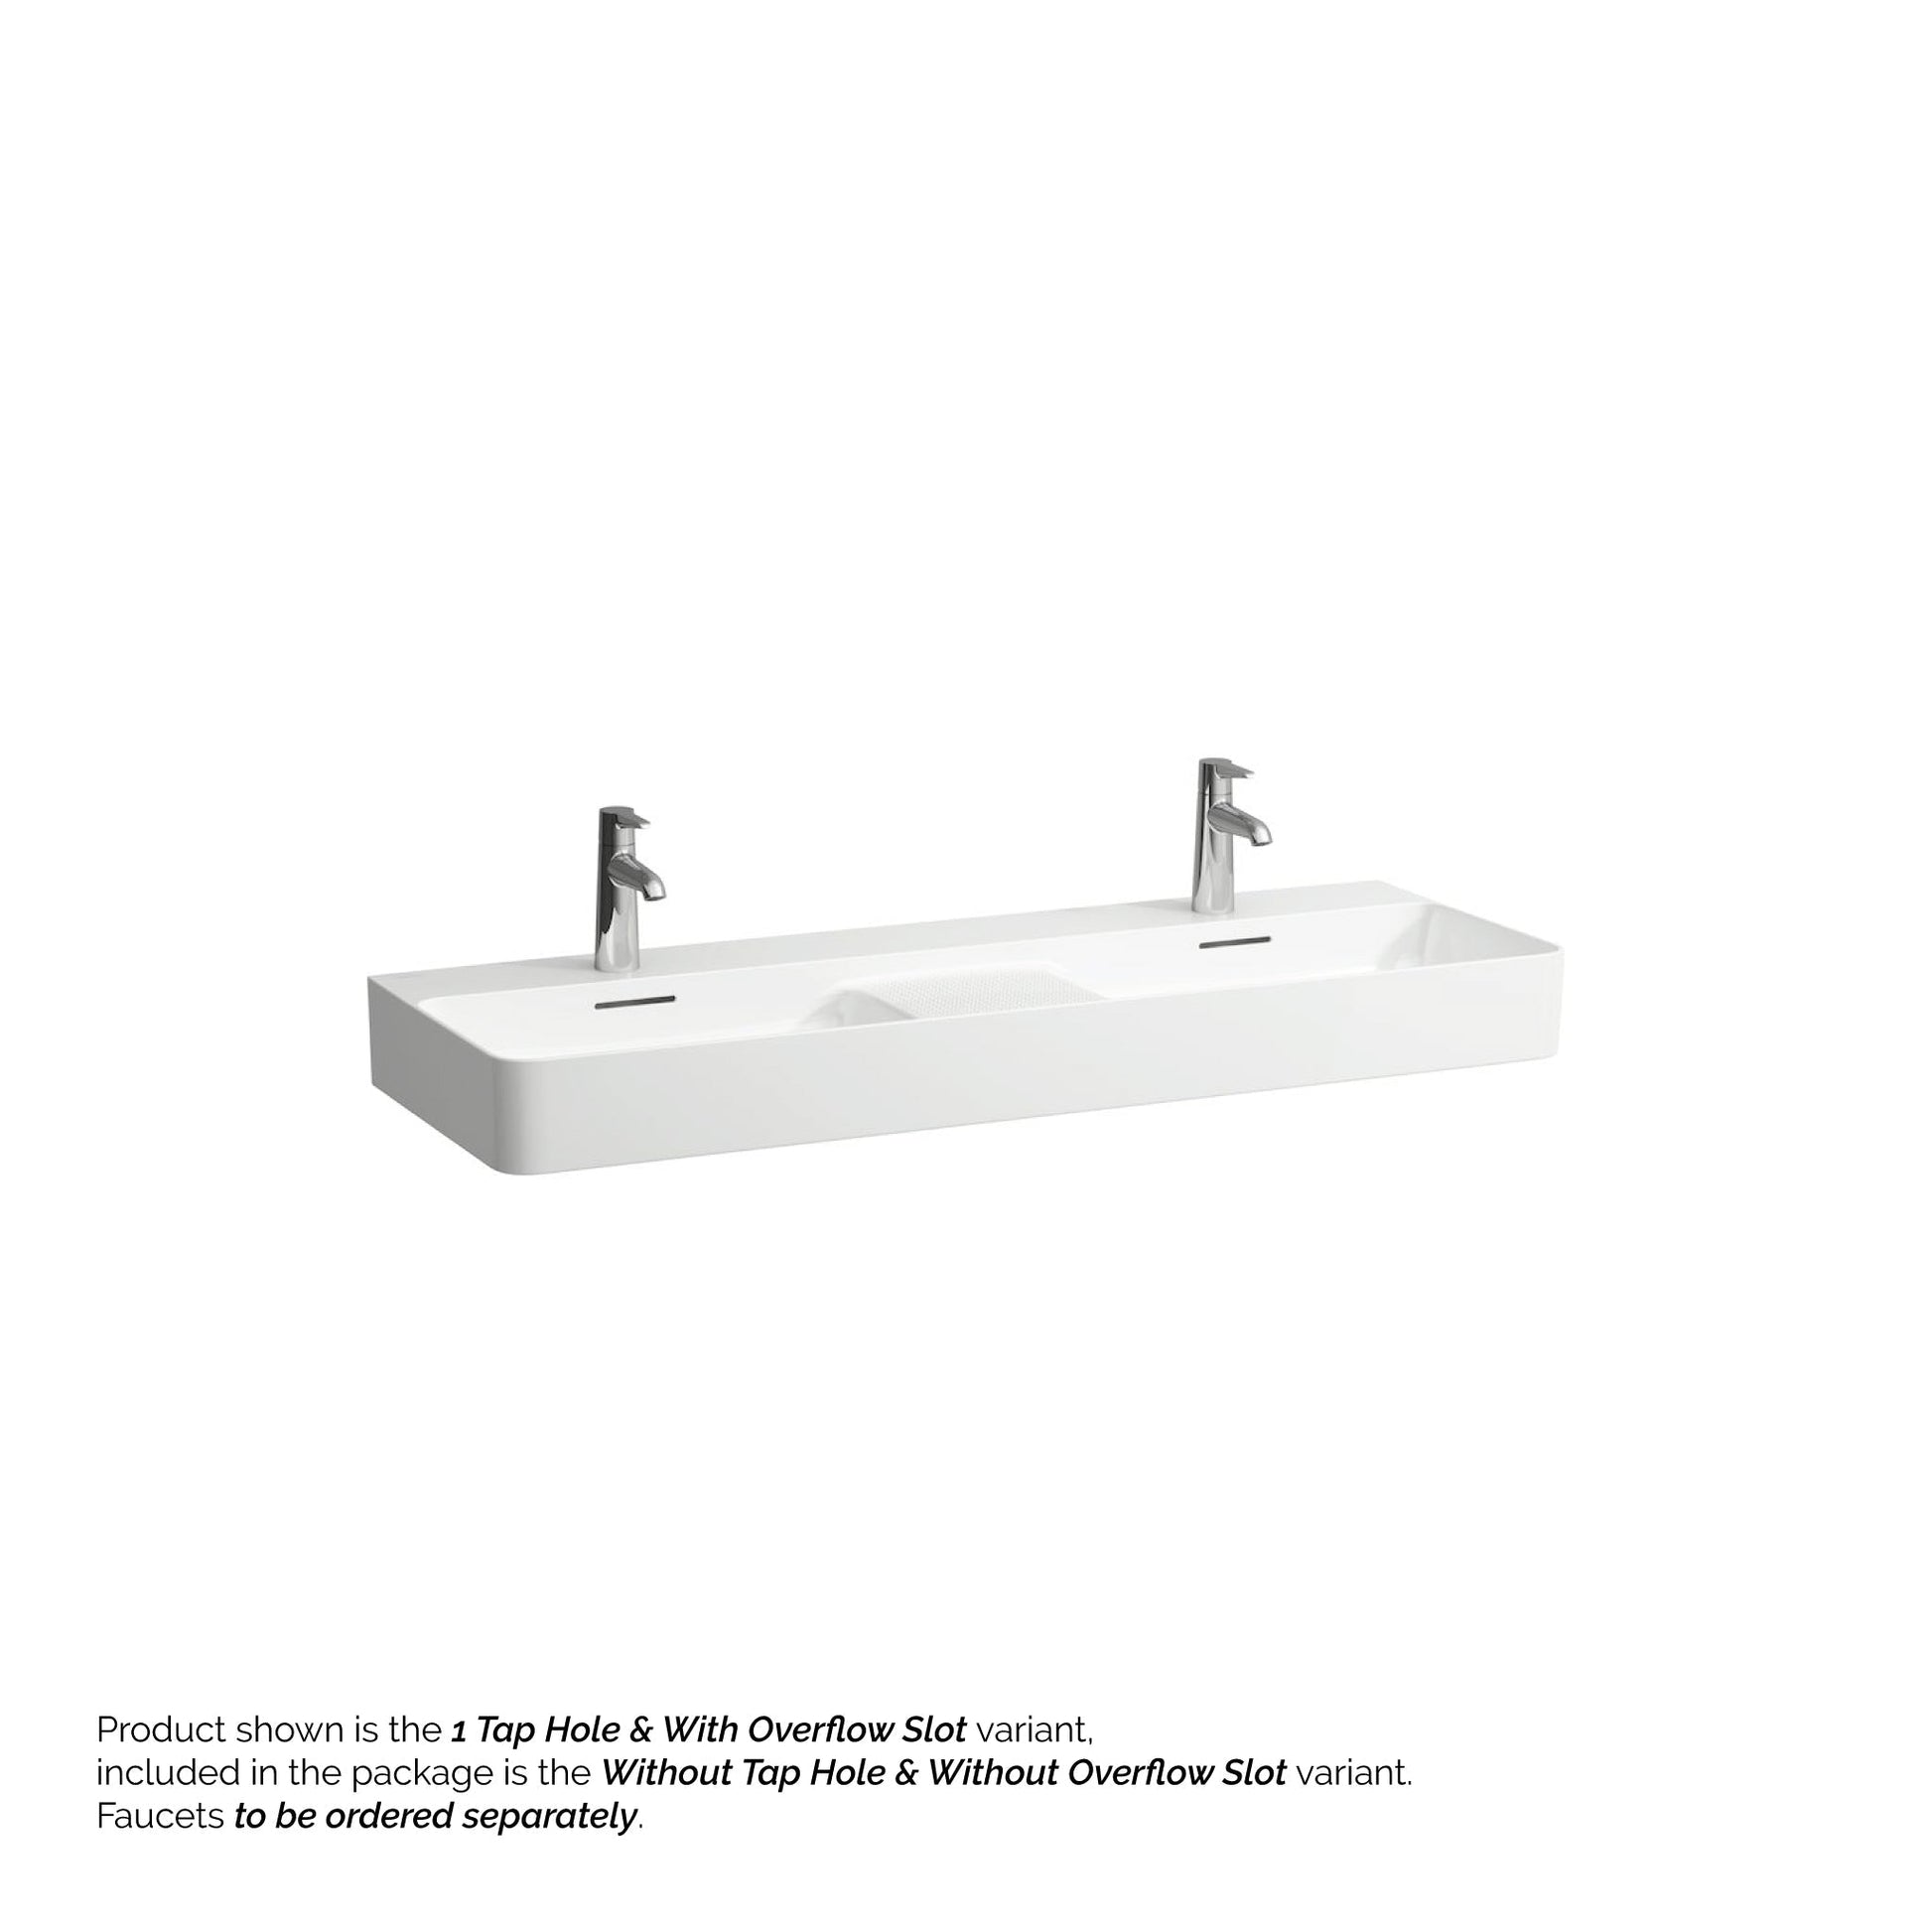 Laufen Val 47" x 17" Matte White Ceramic Wall-Mounted Double Bathroom Sink Without Faucet Hole and Overflow Slot